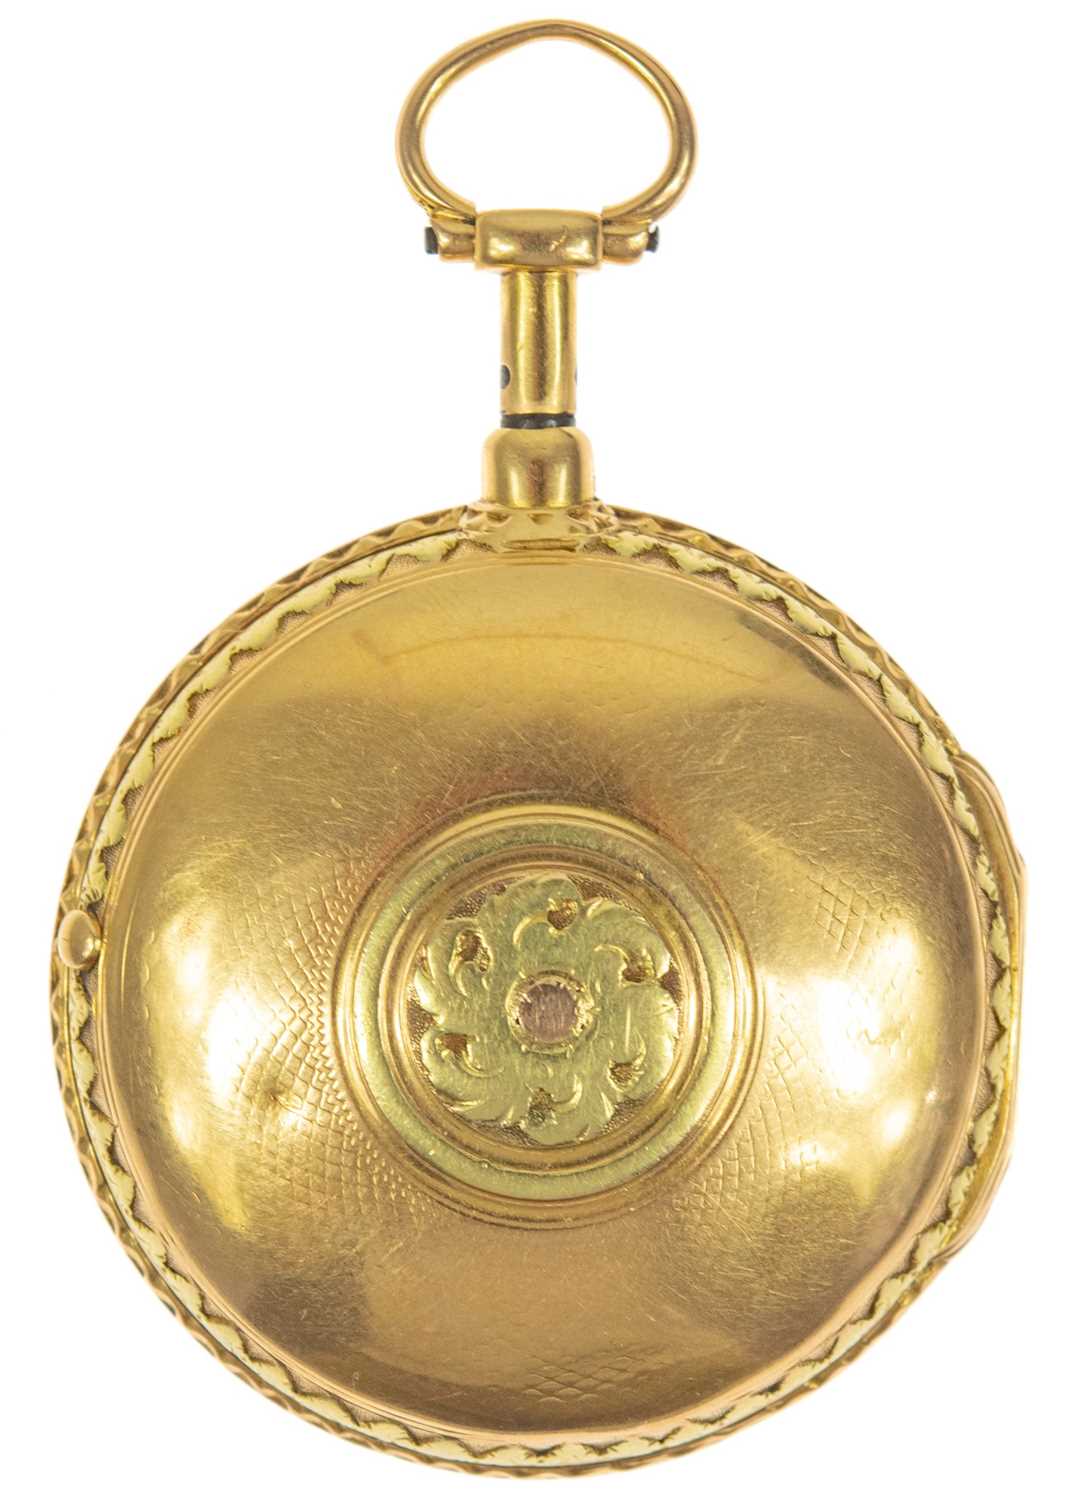 A fine 18th century French 18ct tri-colour gold verge repeating pocket watch by Jaques Castagnet. - Image 2 of 5